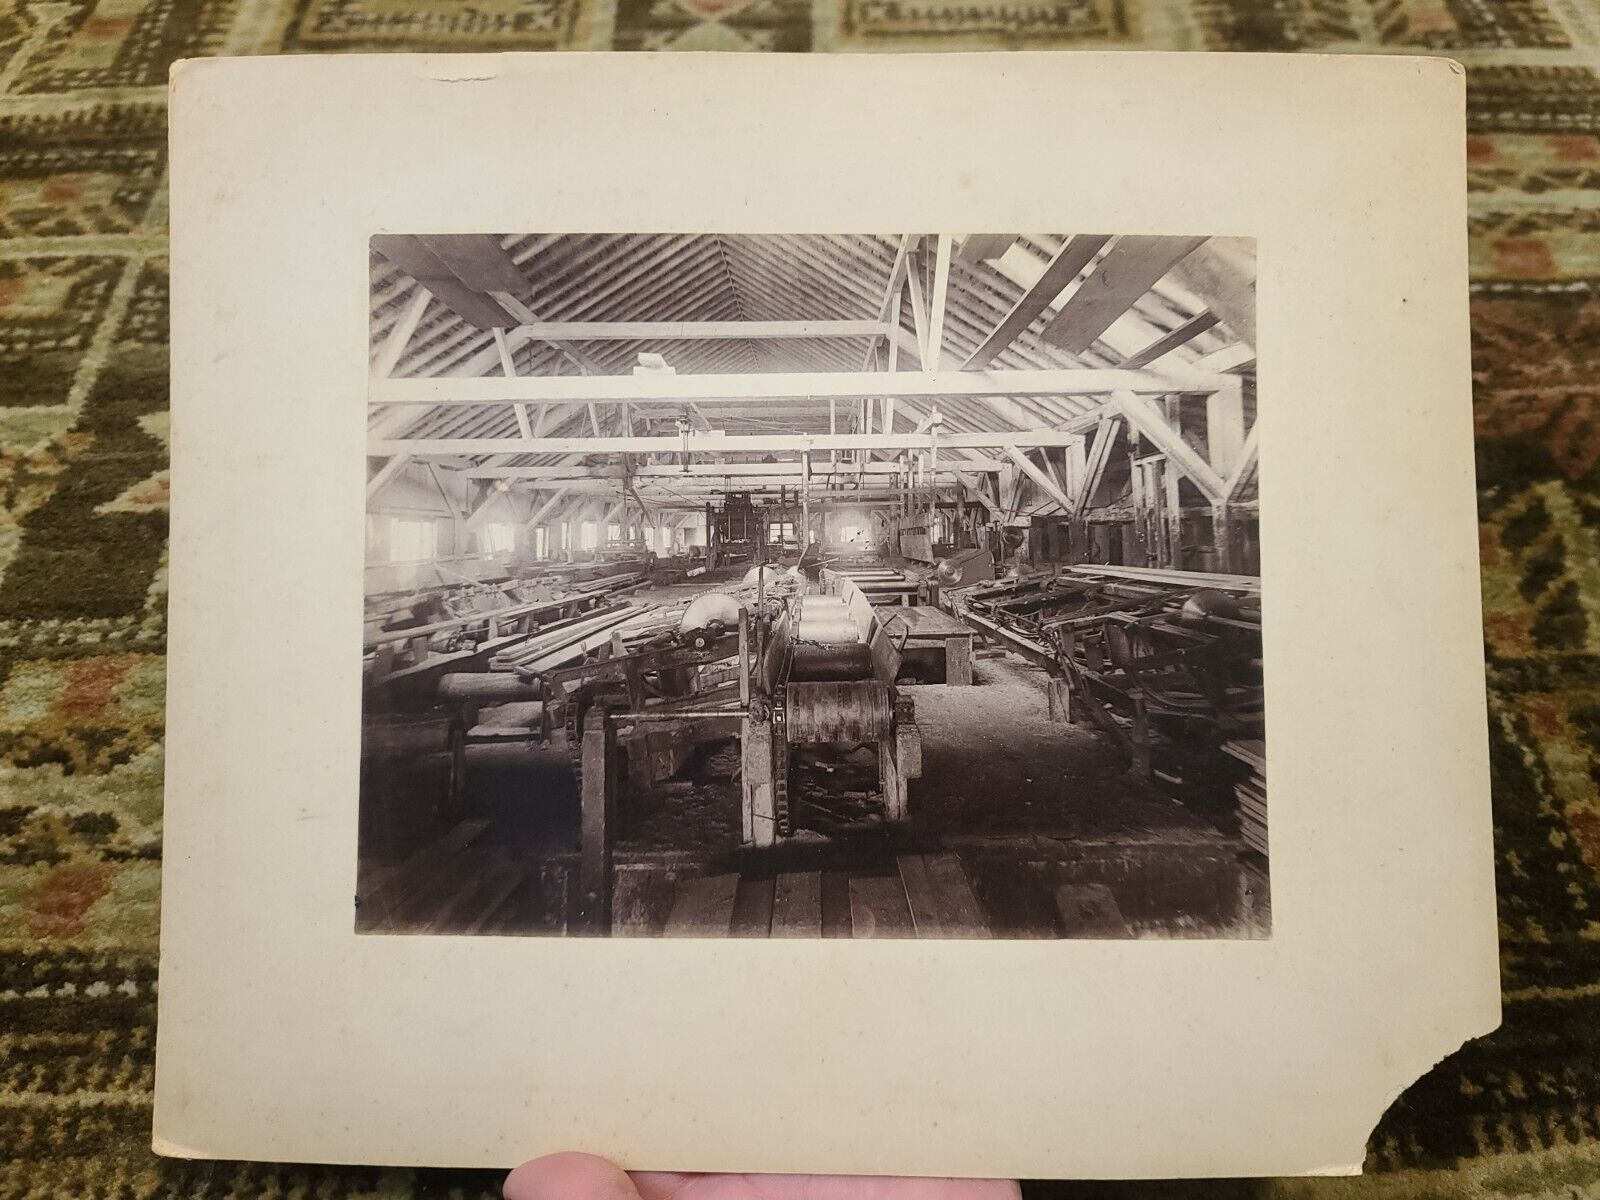 Antique Photograph of Lumber Mill Inside  Building Equipment Machinery Logging